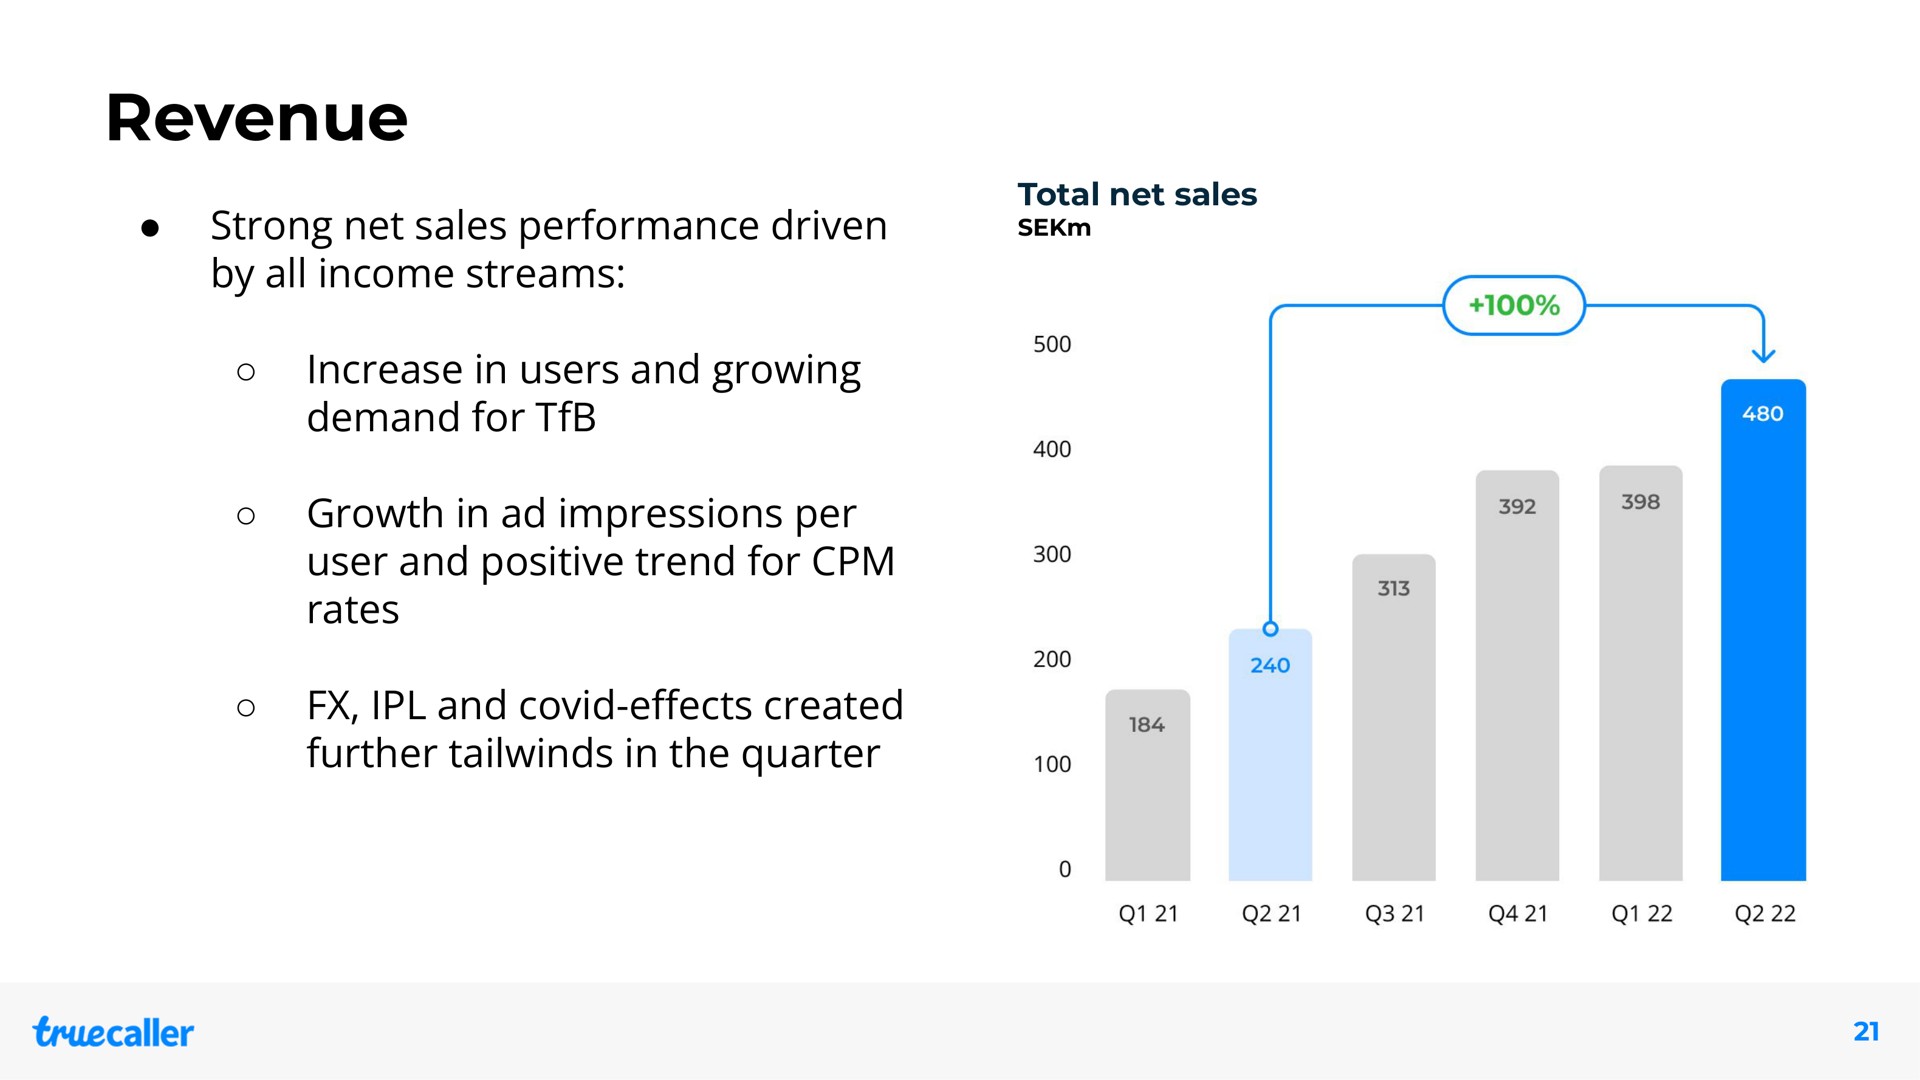 revenue strong net sales performance driven by all income streams increase in users and growing demand for growth in impressions per user and positive trend for rates and covid created further in the quarter covid effects | Truecaller